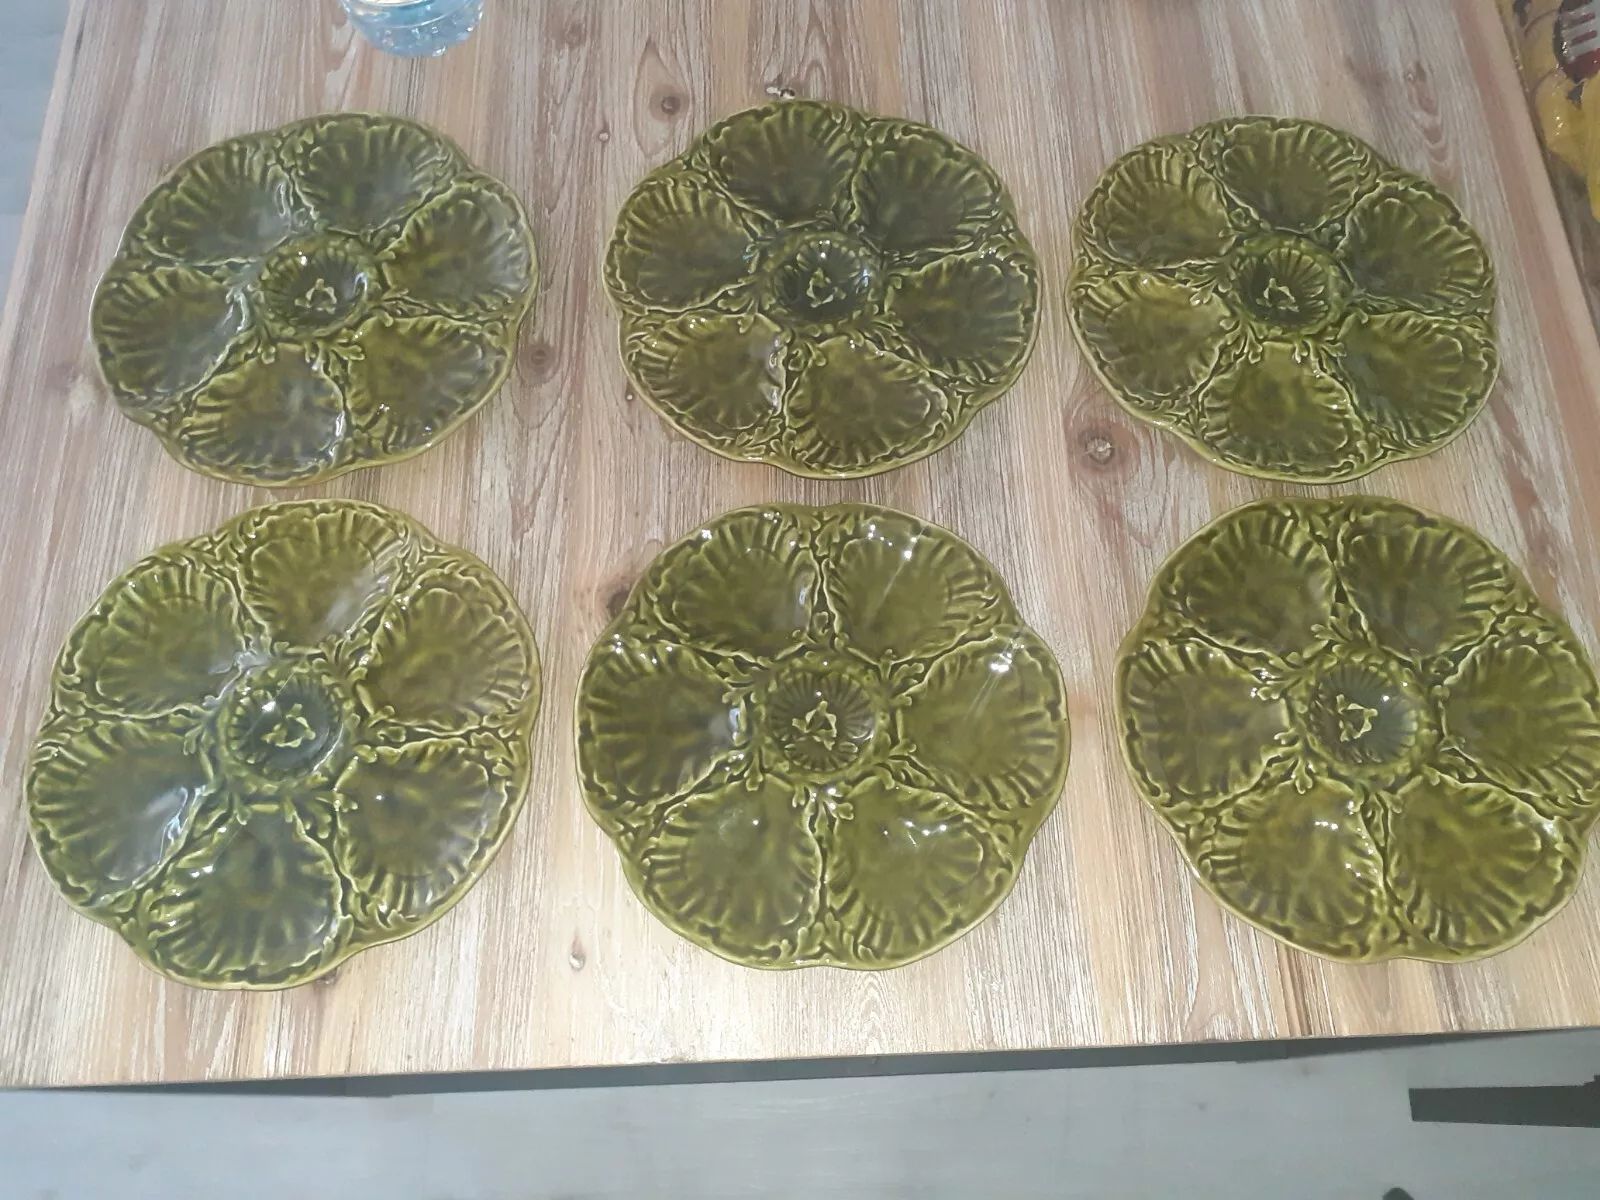 Vintage Gien Set of 6 Oyster Plates   French Faience Majolica | eBay US